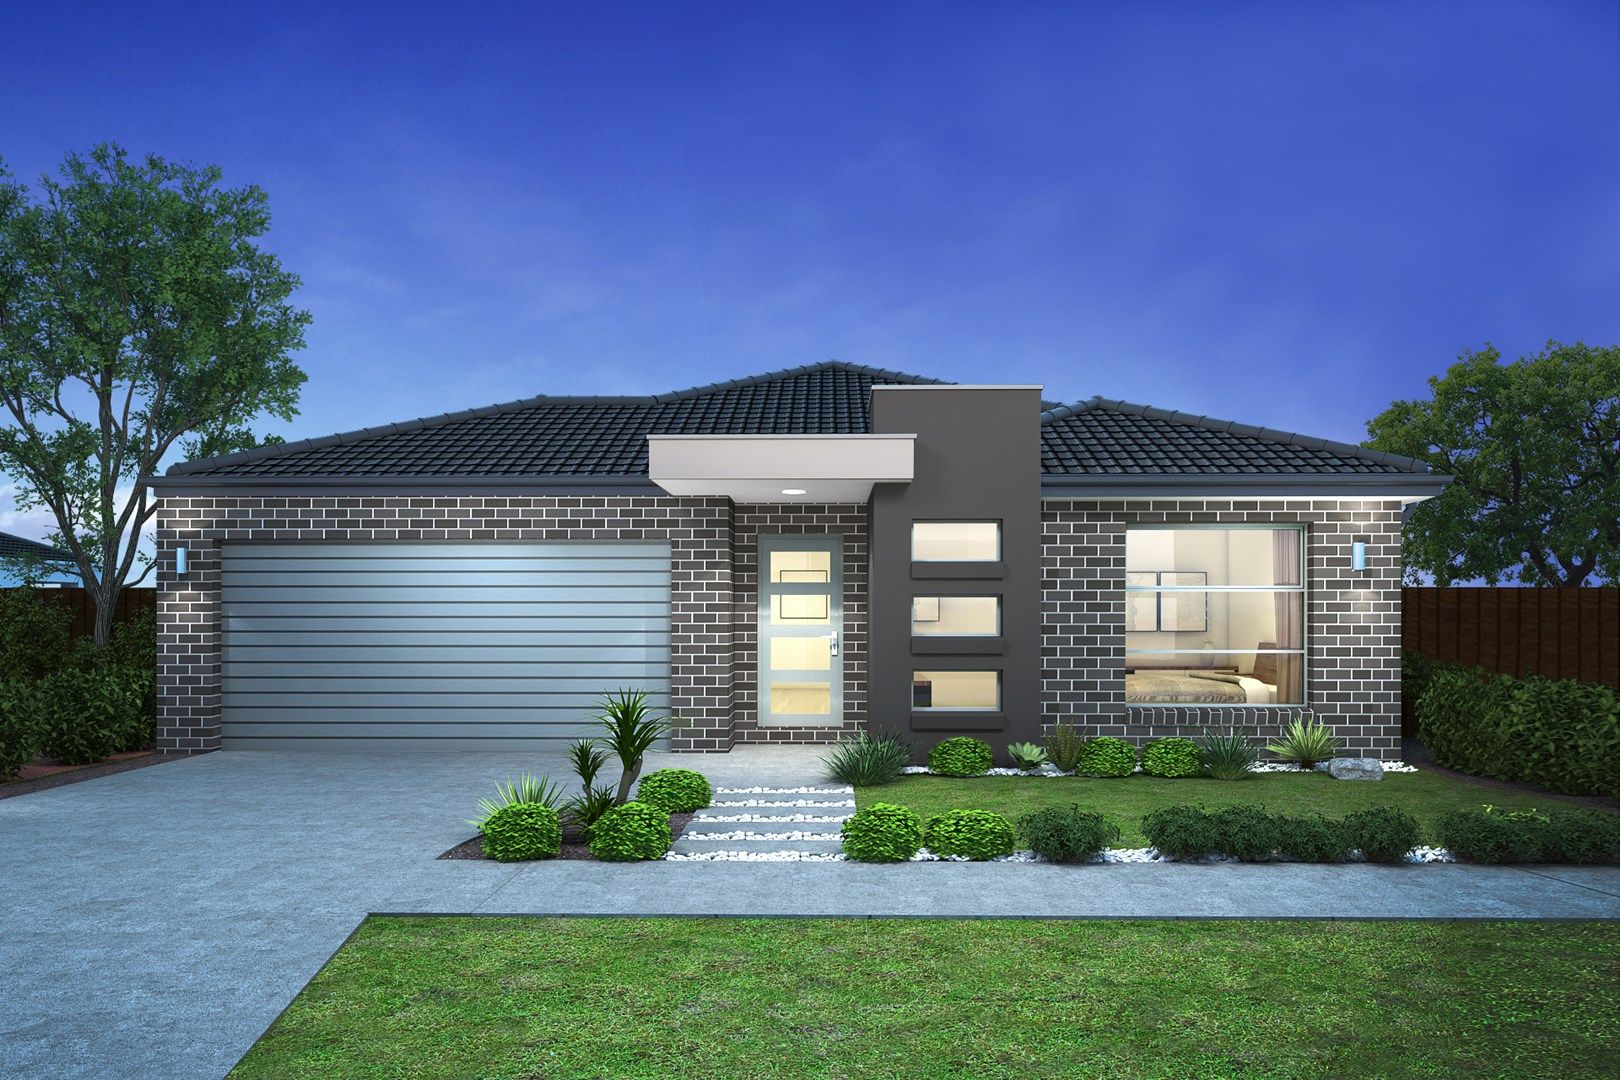 4 bedrooms New House & Land in Lot 244 Gamut Crescent FOSTER VIC, 3960